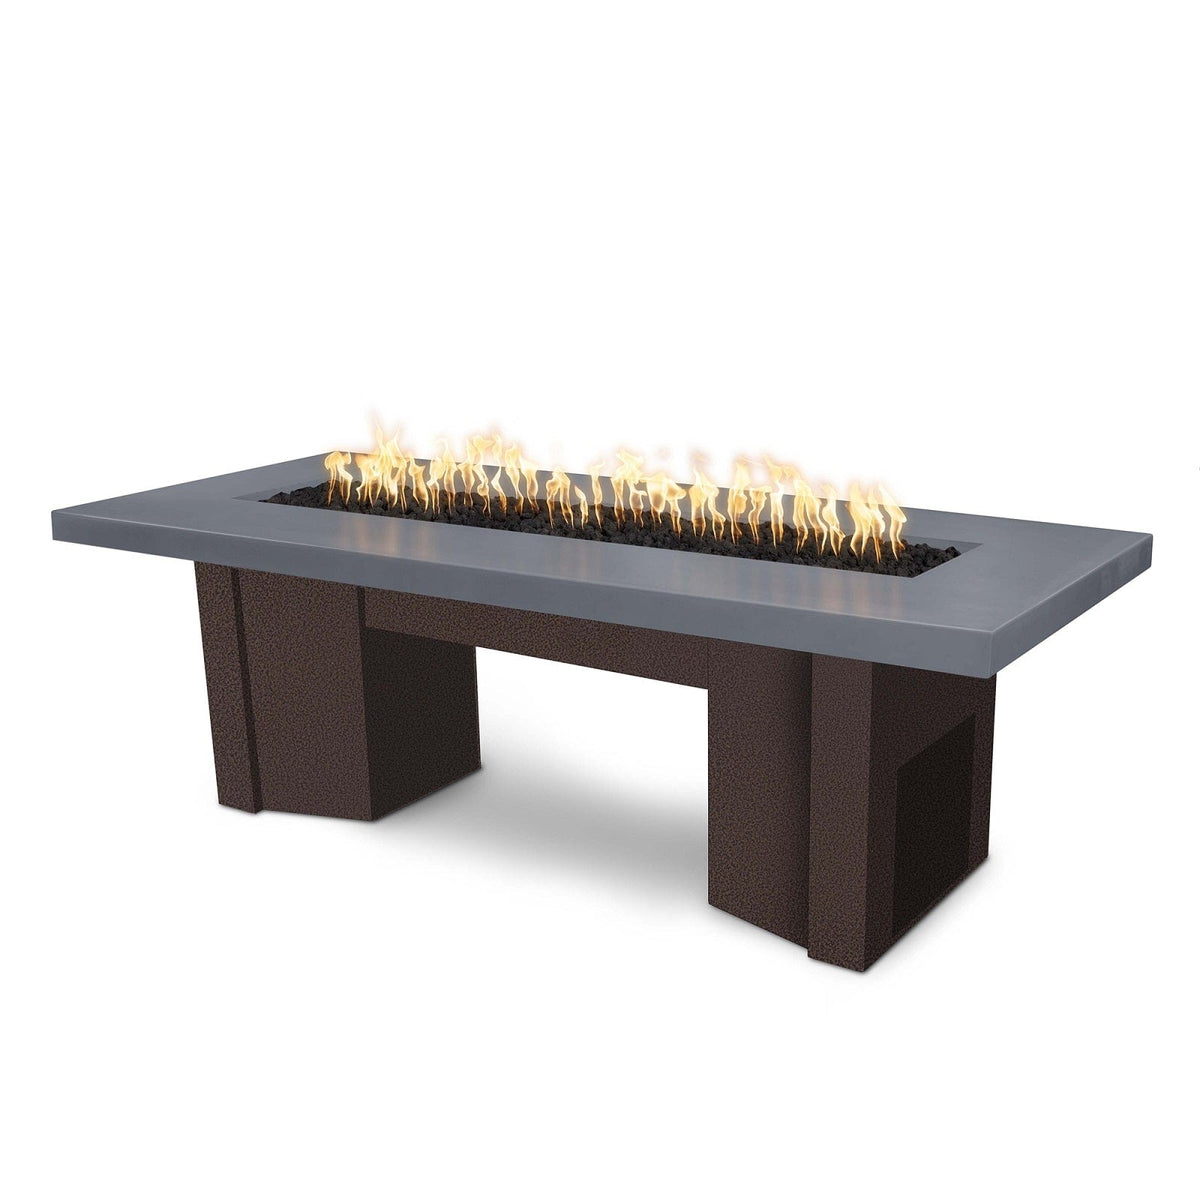 The Outdoor Plus Fire Features Gray (-GRY) / Copper Vein Powder Coated Steel (-CPV) The Outdoor Plus 78&quot; Alameda Fire Table Smooth Concrete in Natural Gas - 110V Plug &amp; Play Electronic Ignition / OPT-ALMGFRC78EKIT-NG